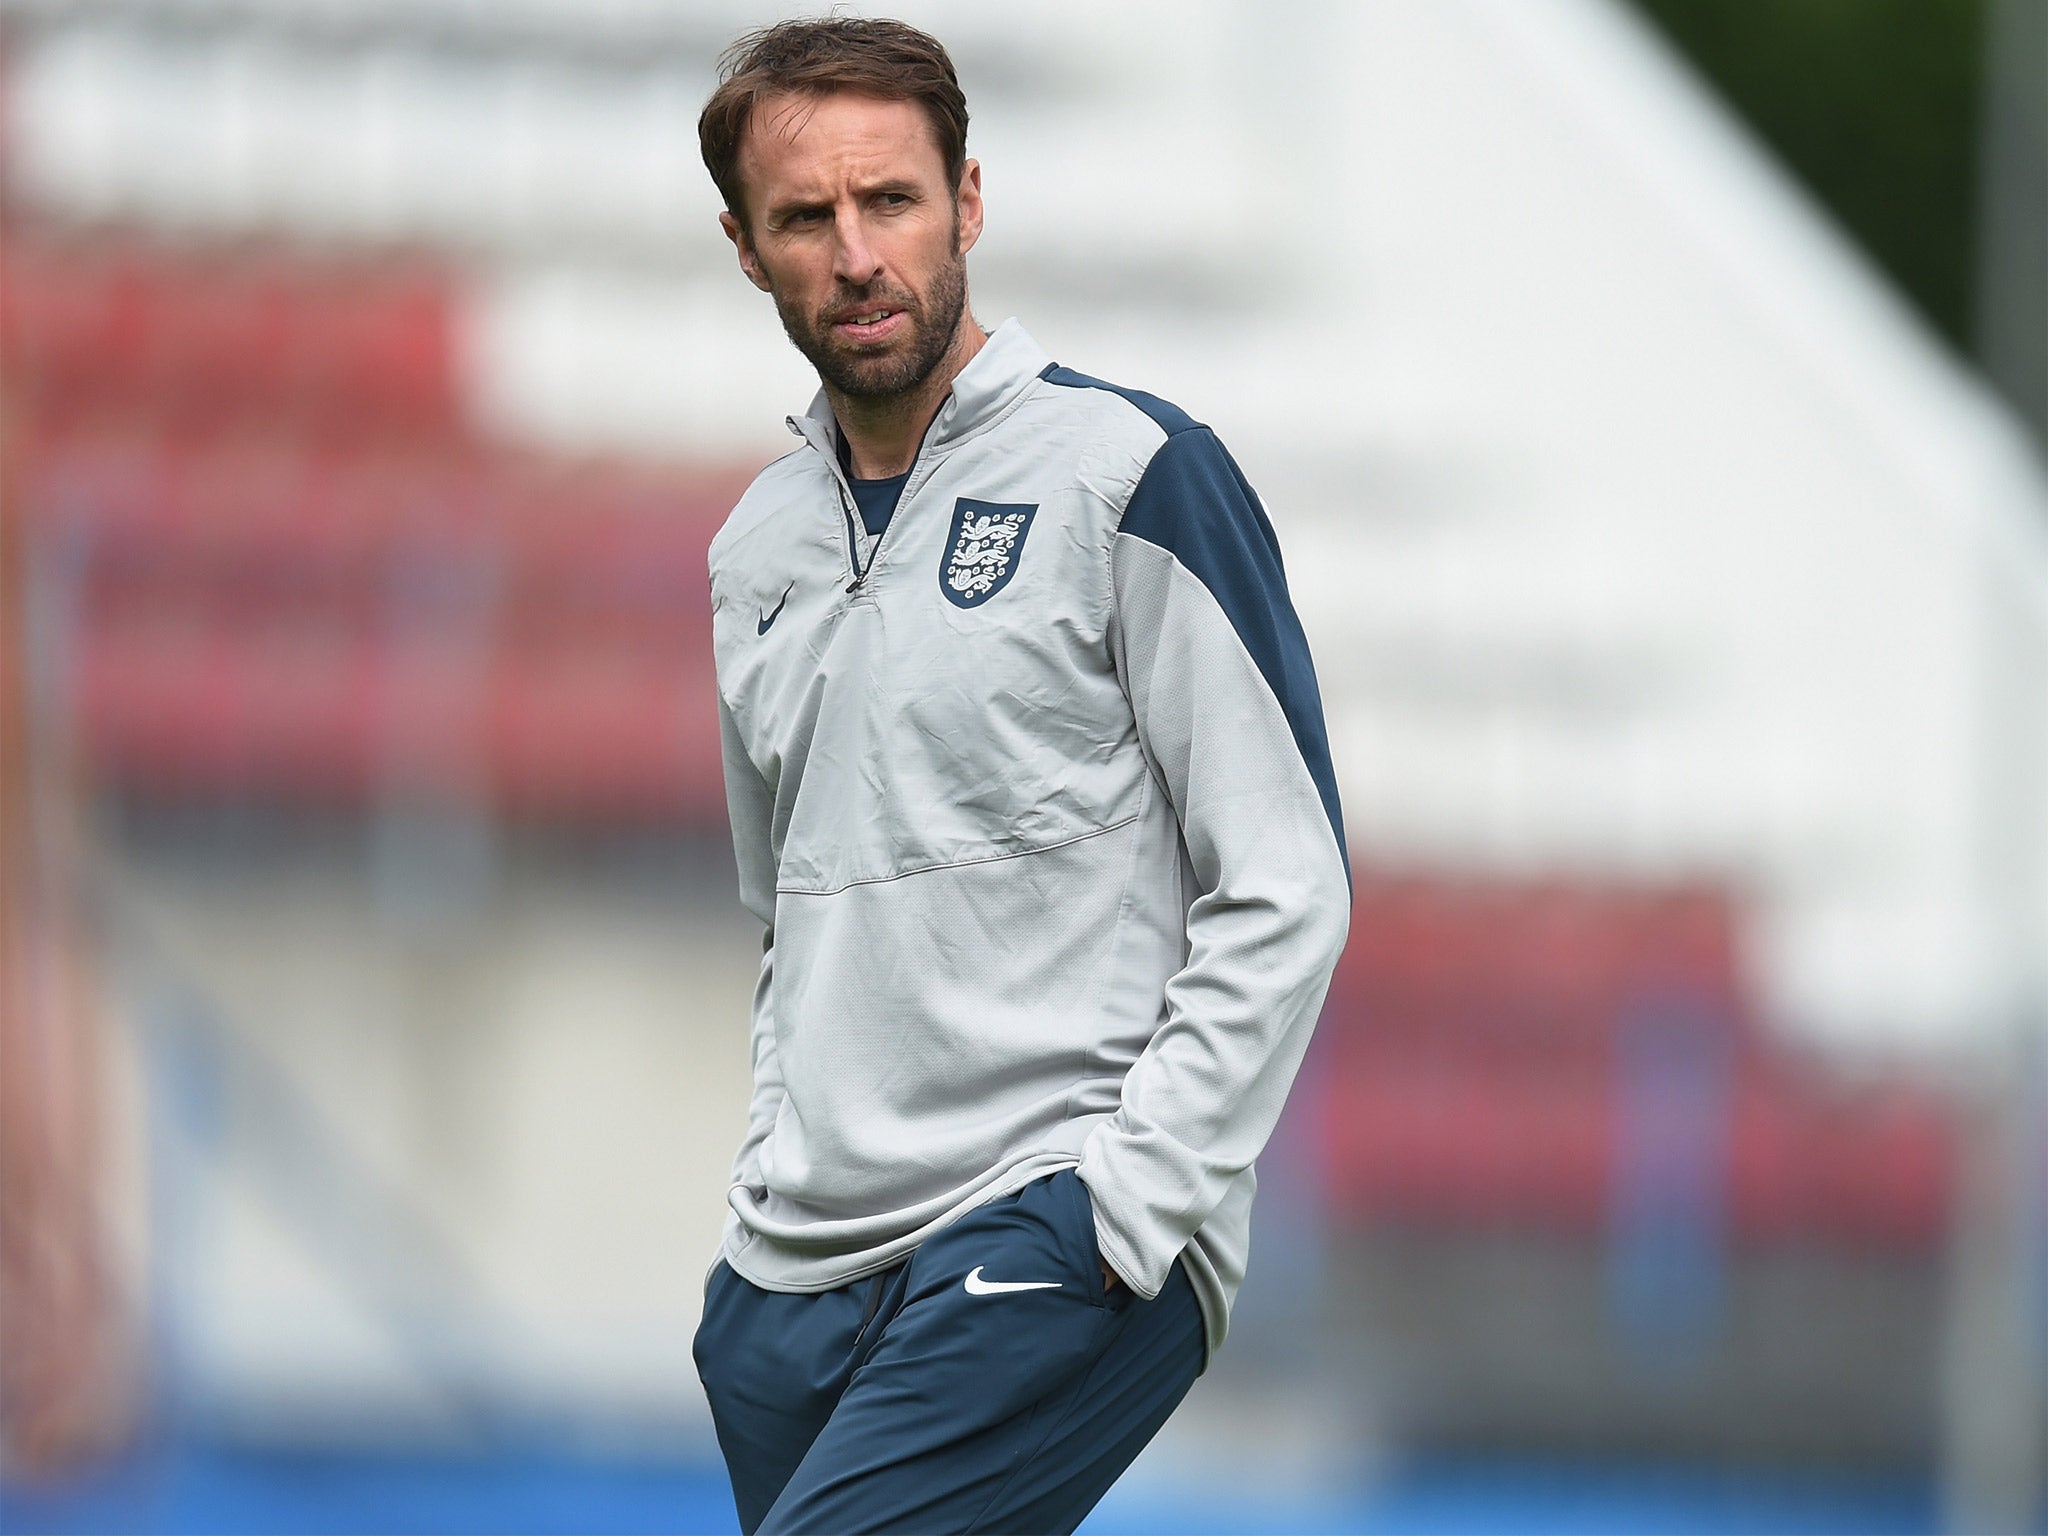 Gareth Southgate: 'Come on, let’s see how far we can get'